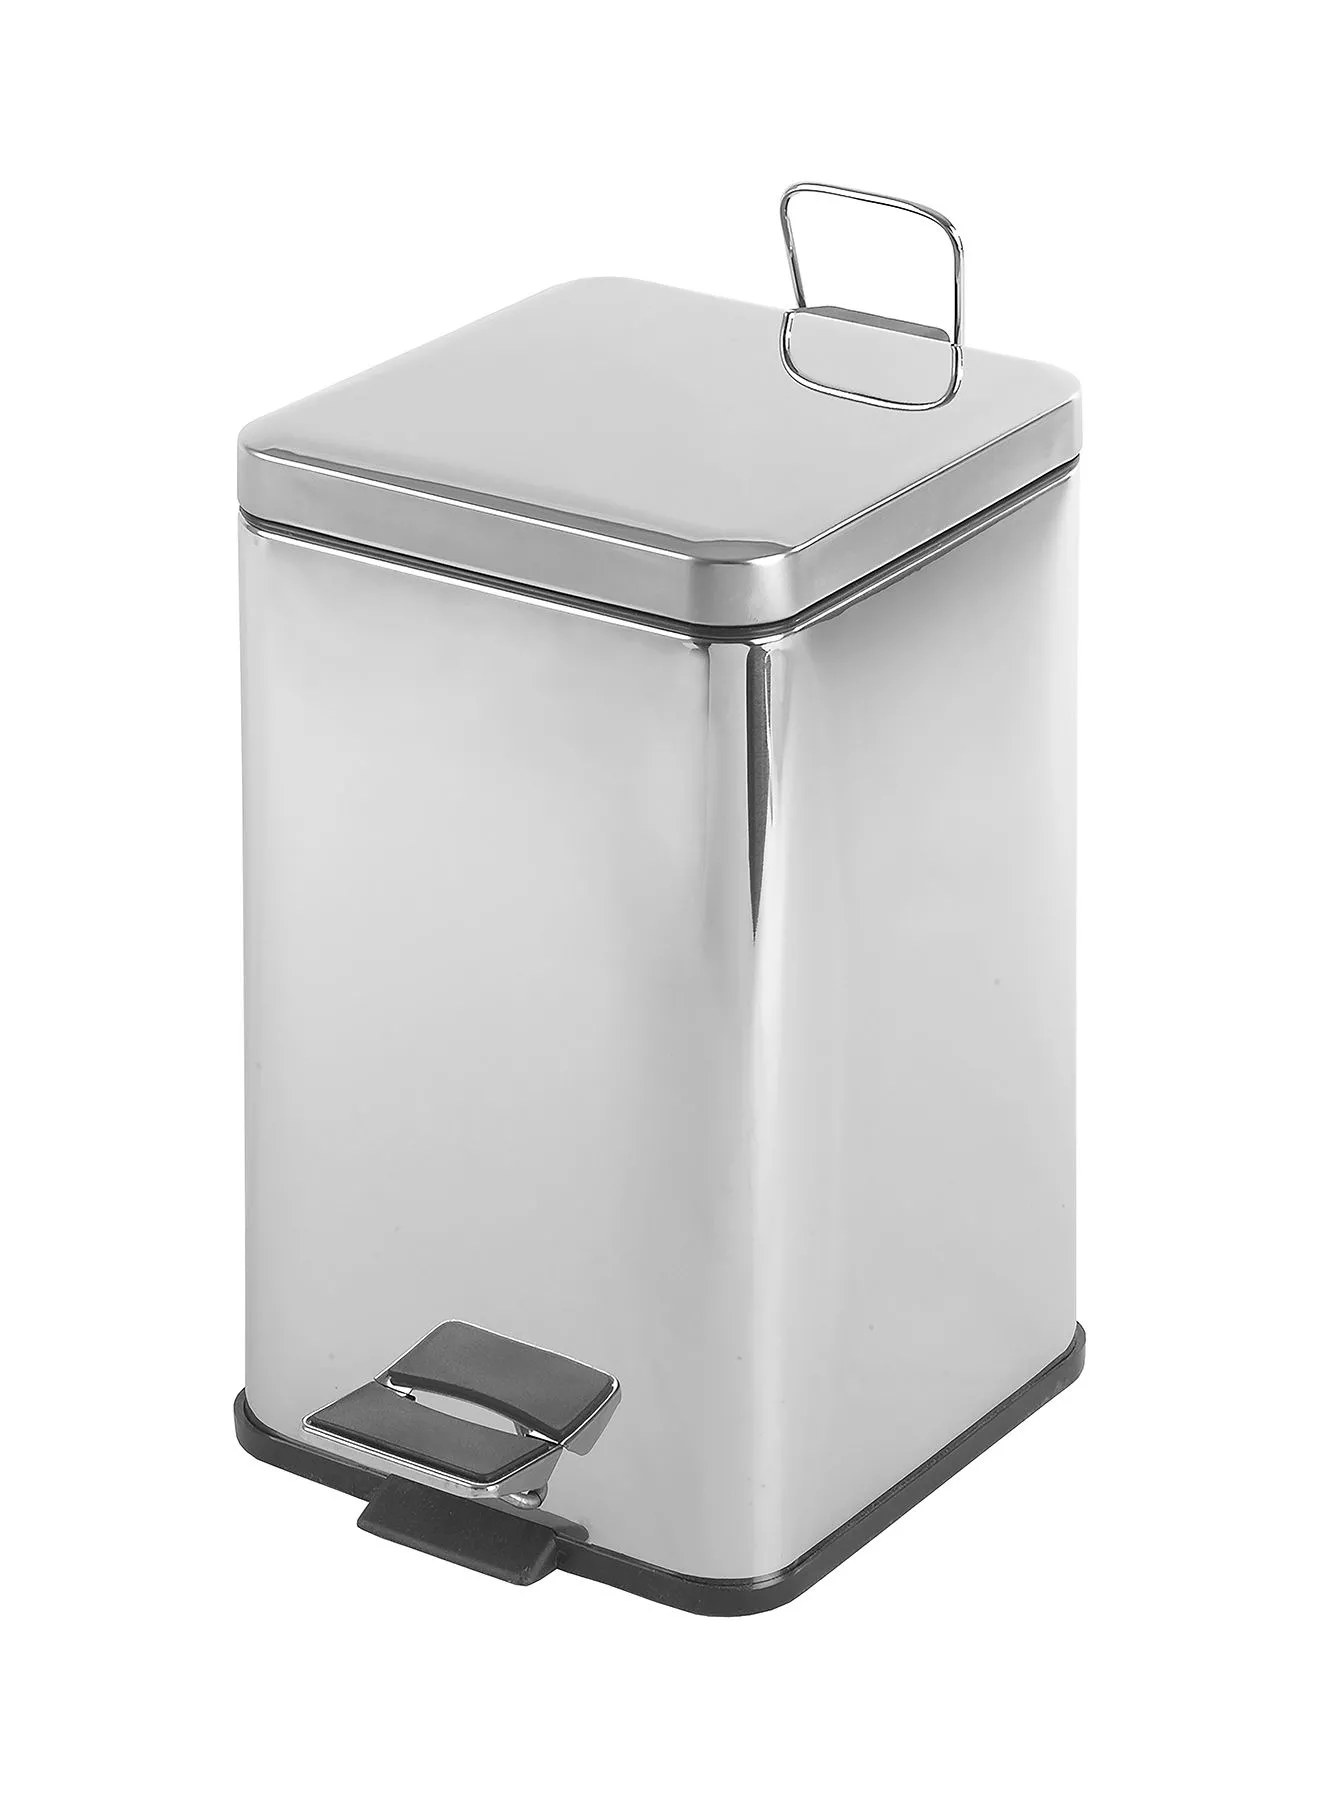 Amal Pedal Trash Bin Stainless Steel For Bathroom Kitchen And Offices Silver 20X20X29.5 cm